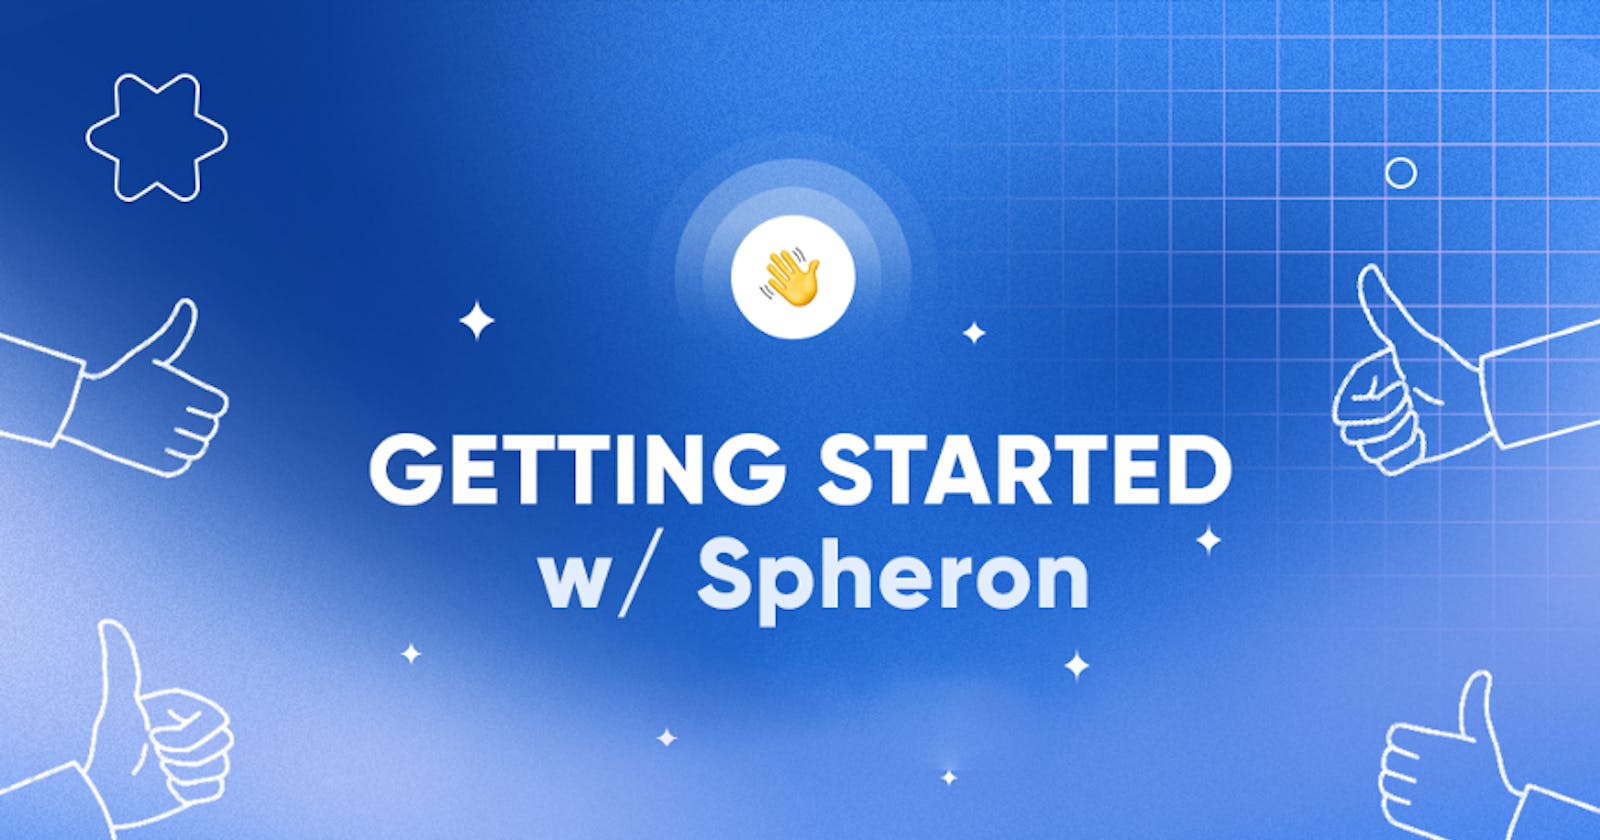 Making a Dapp truly decentralized with Spheron